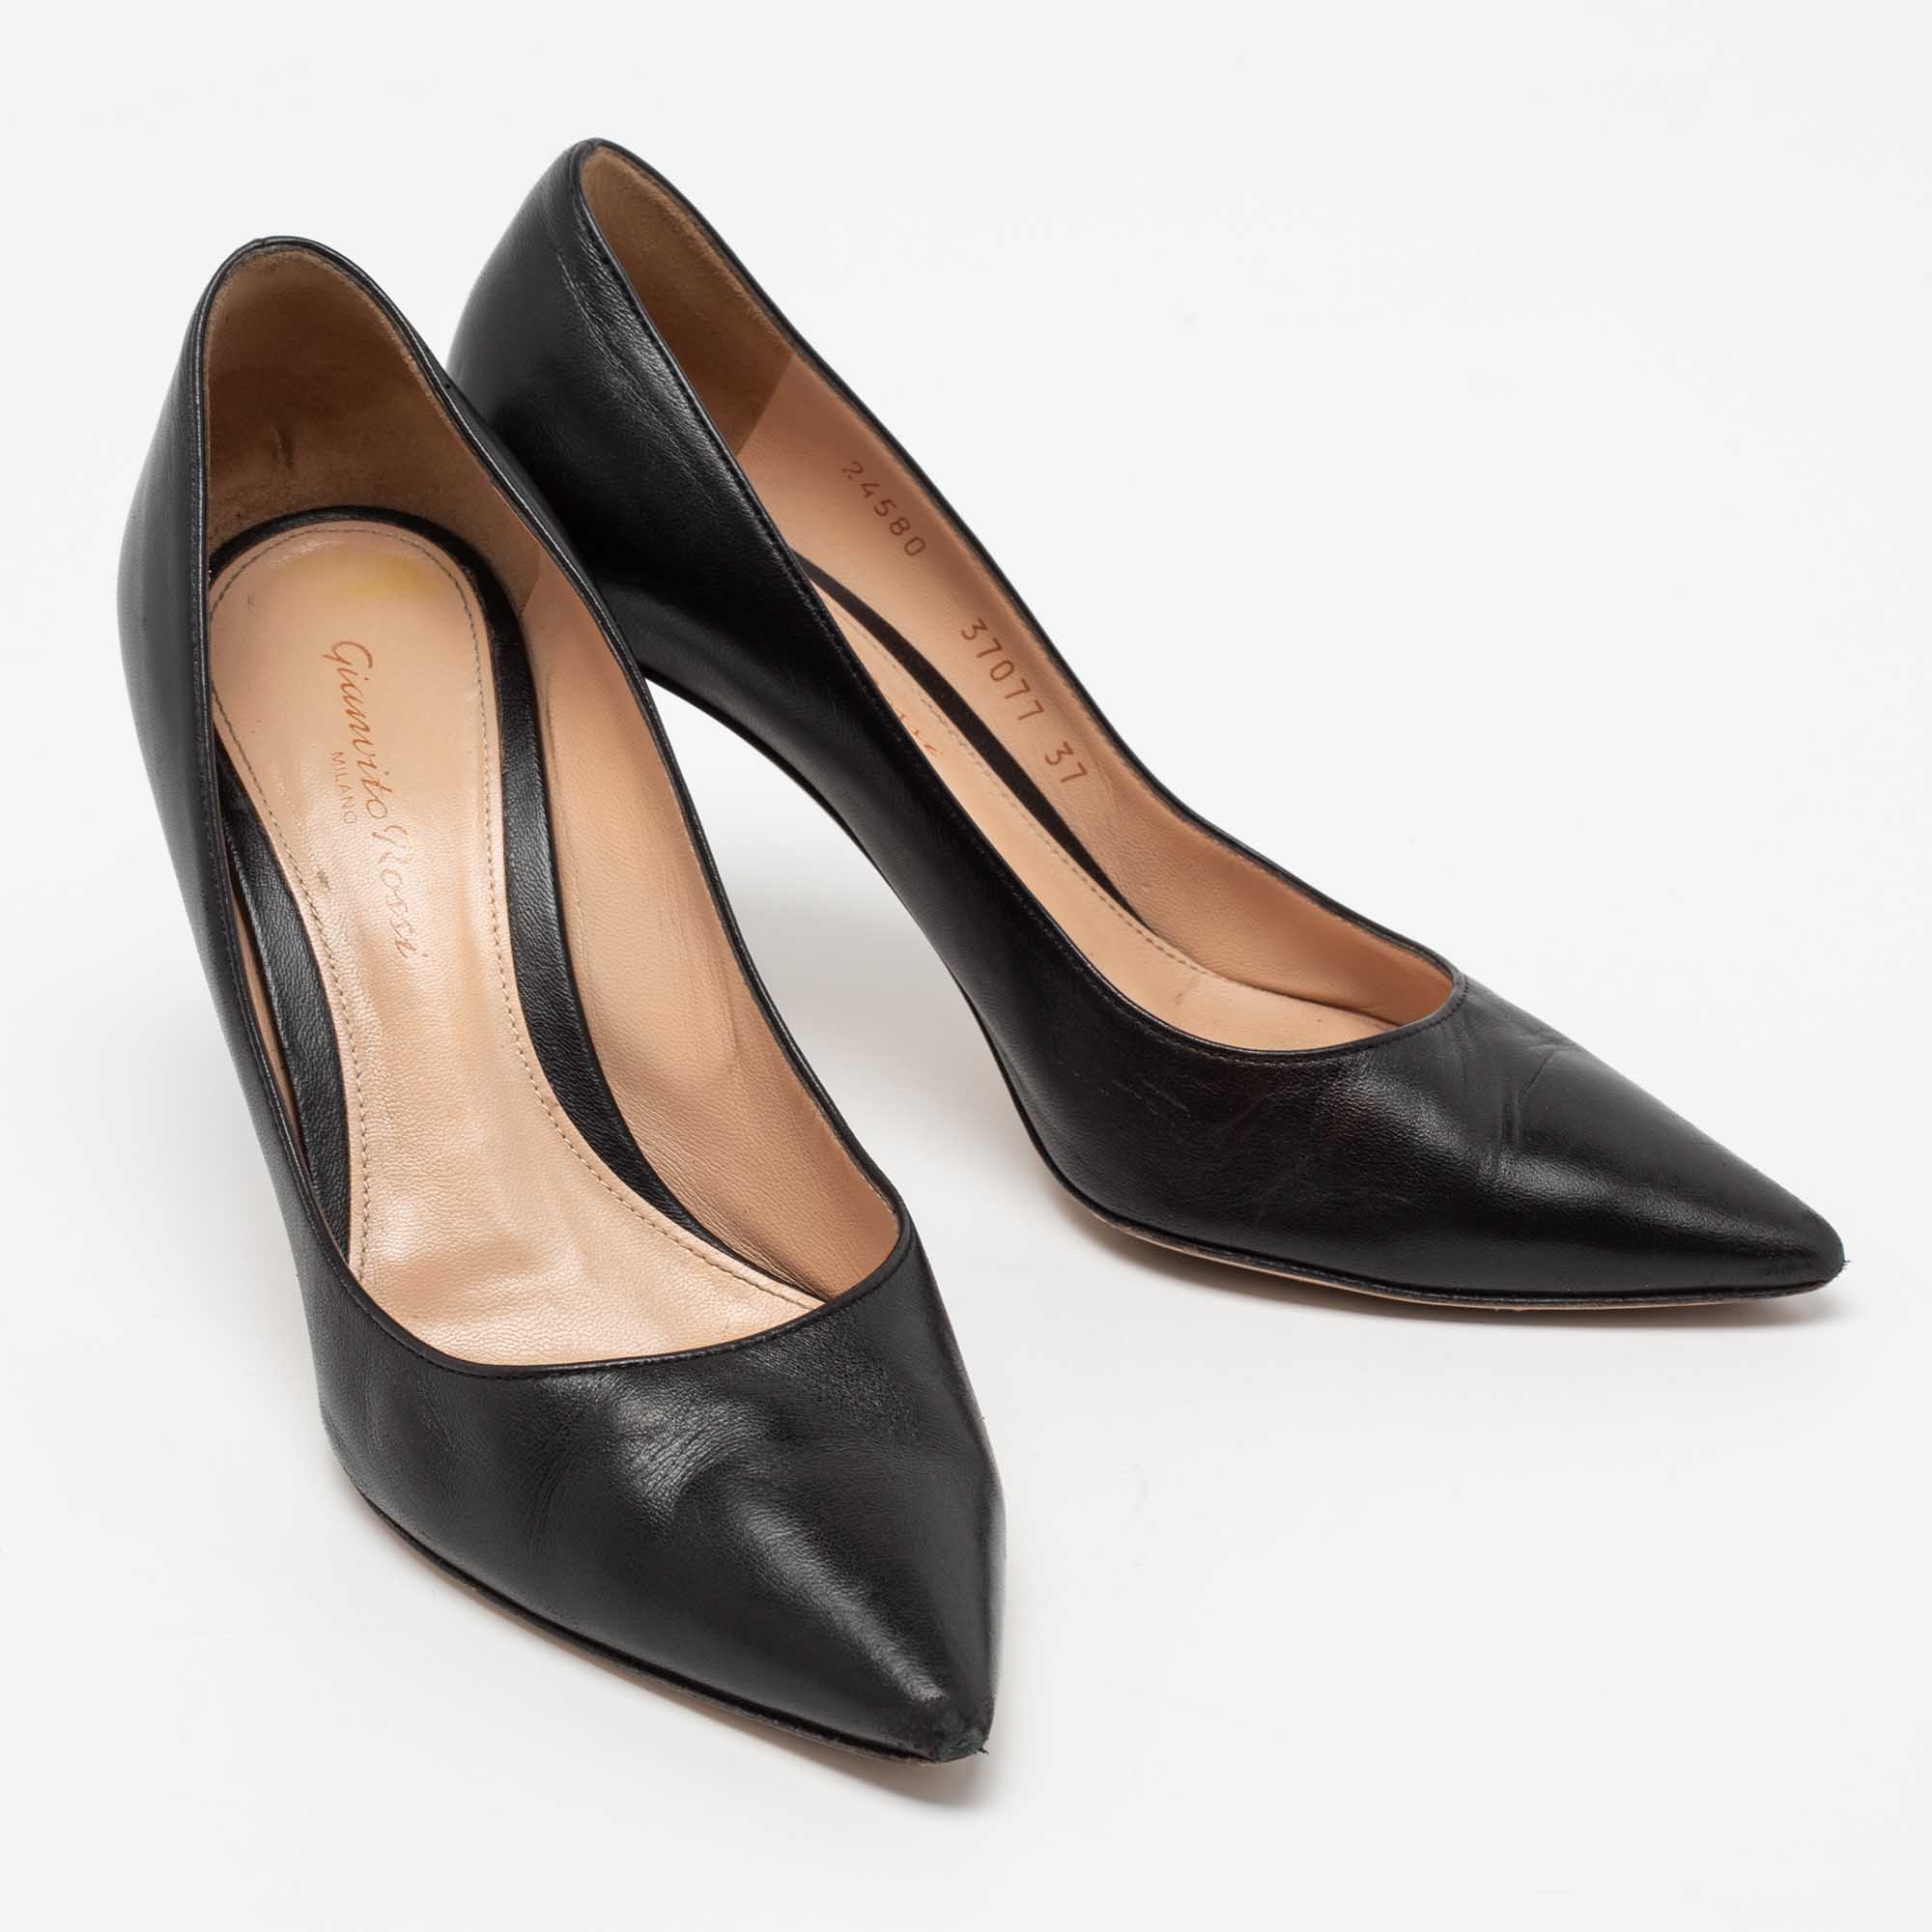 Gianvito Rossi Black Leather Pointed-Toe Pumps Size 37